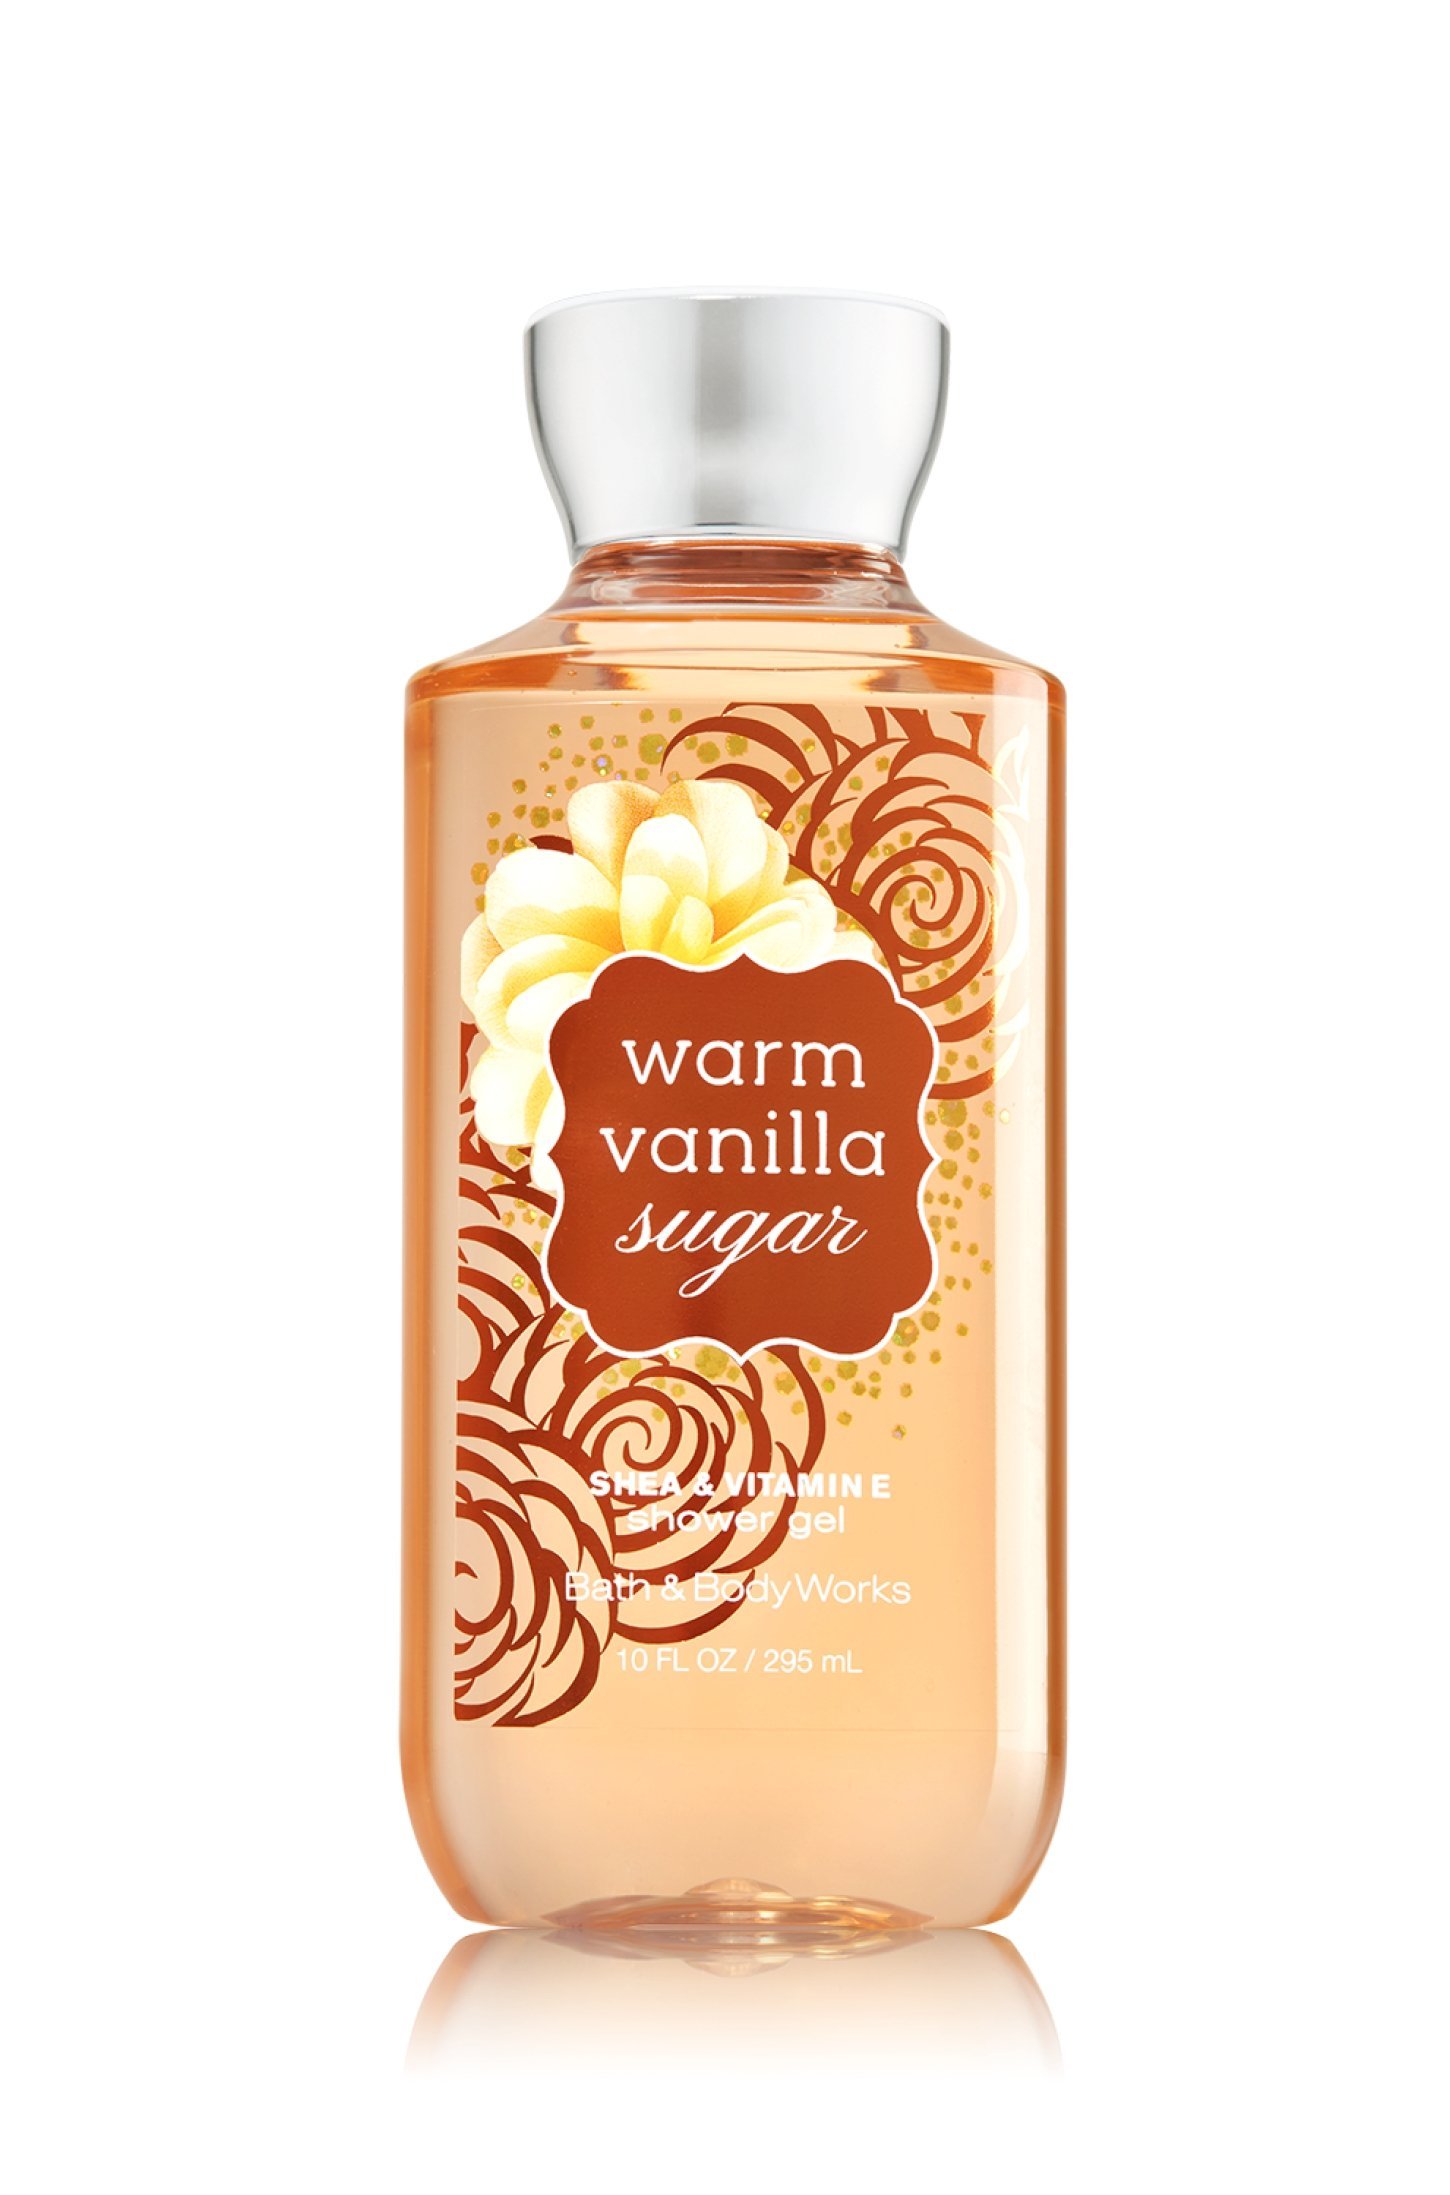 Bath and Body Works Warm Vanilla Sugar Signature Collection Shower Gel, 10 oz, new packaging